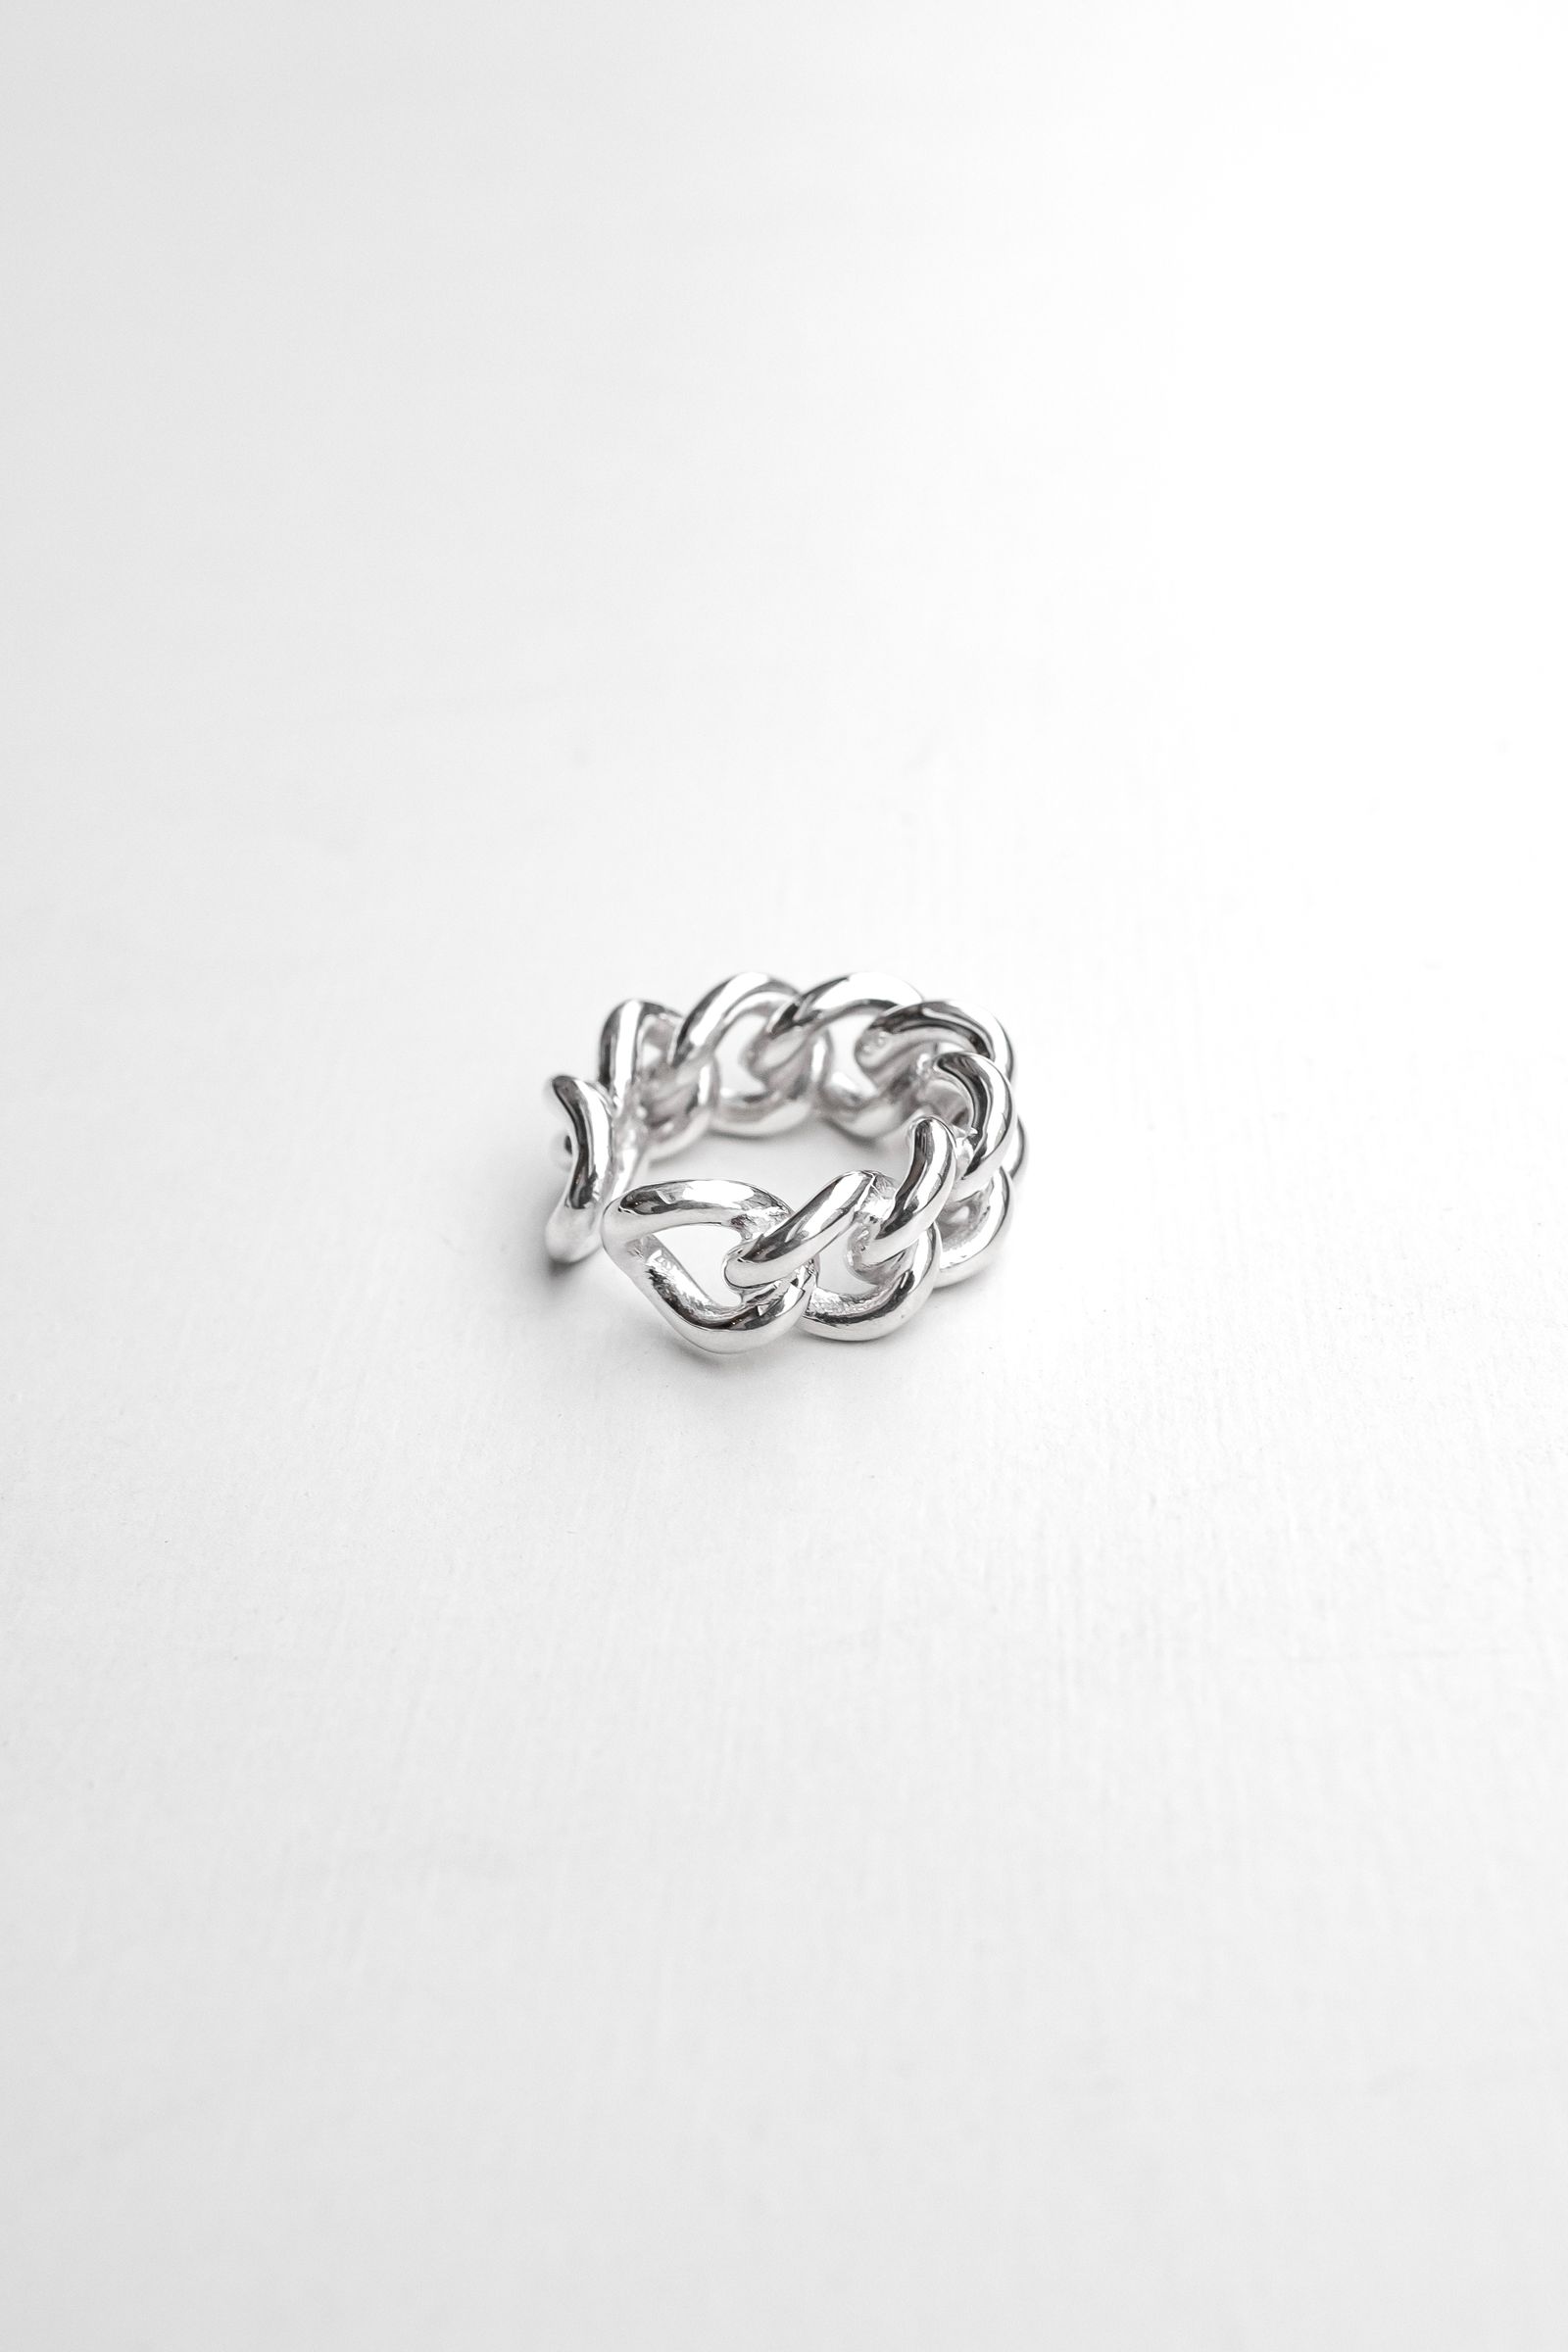 roundabout - Silver Chain Ring / Silver | Retikle Online Store